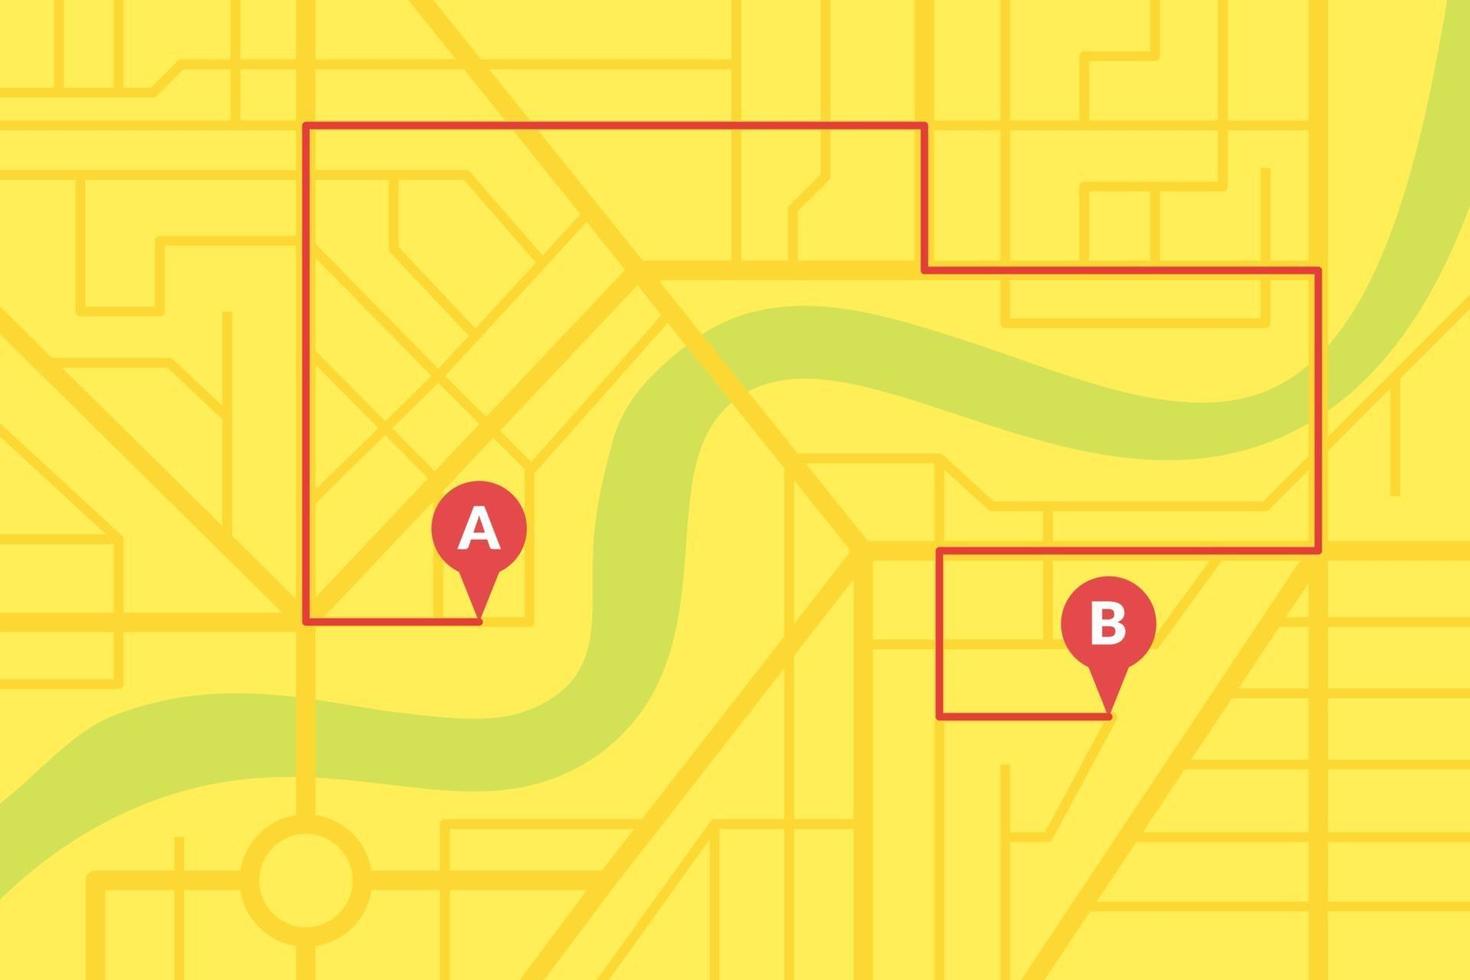 City street map plan with GPS pins and navigation route from A to B point markers. Vector yellow color eps illustration schema